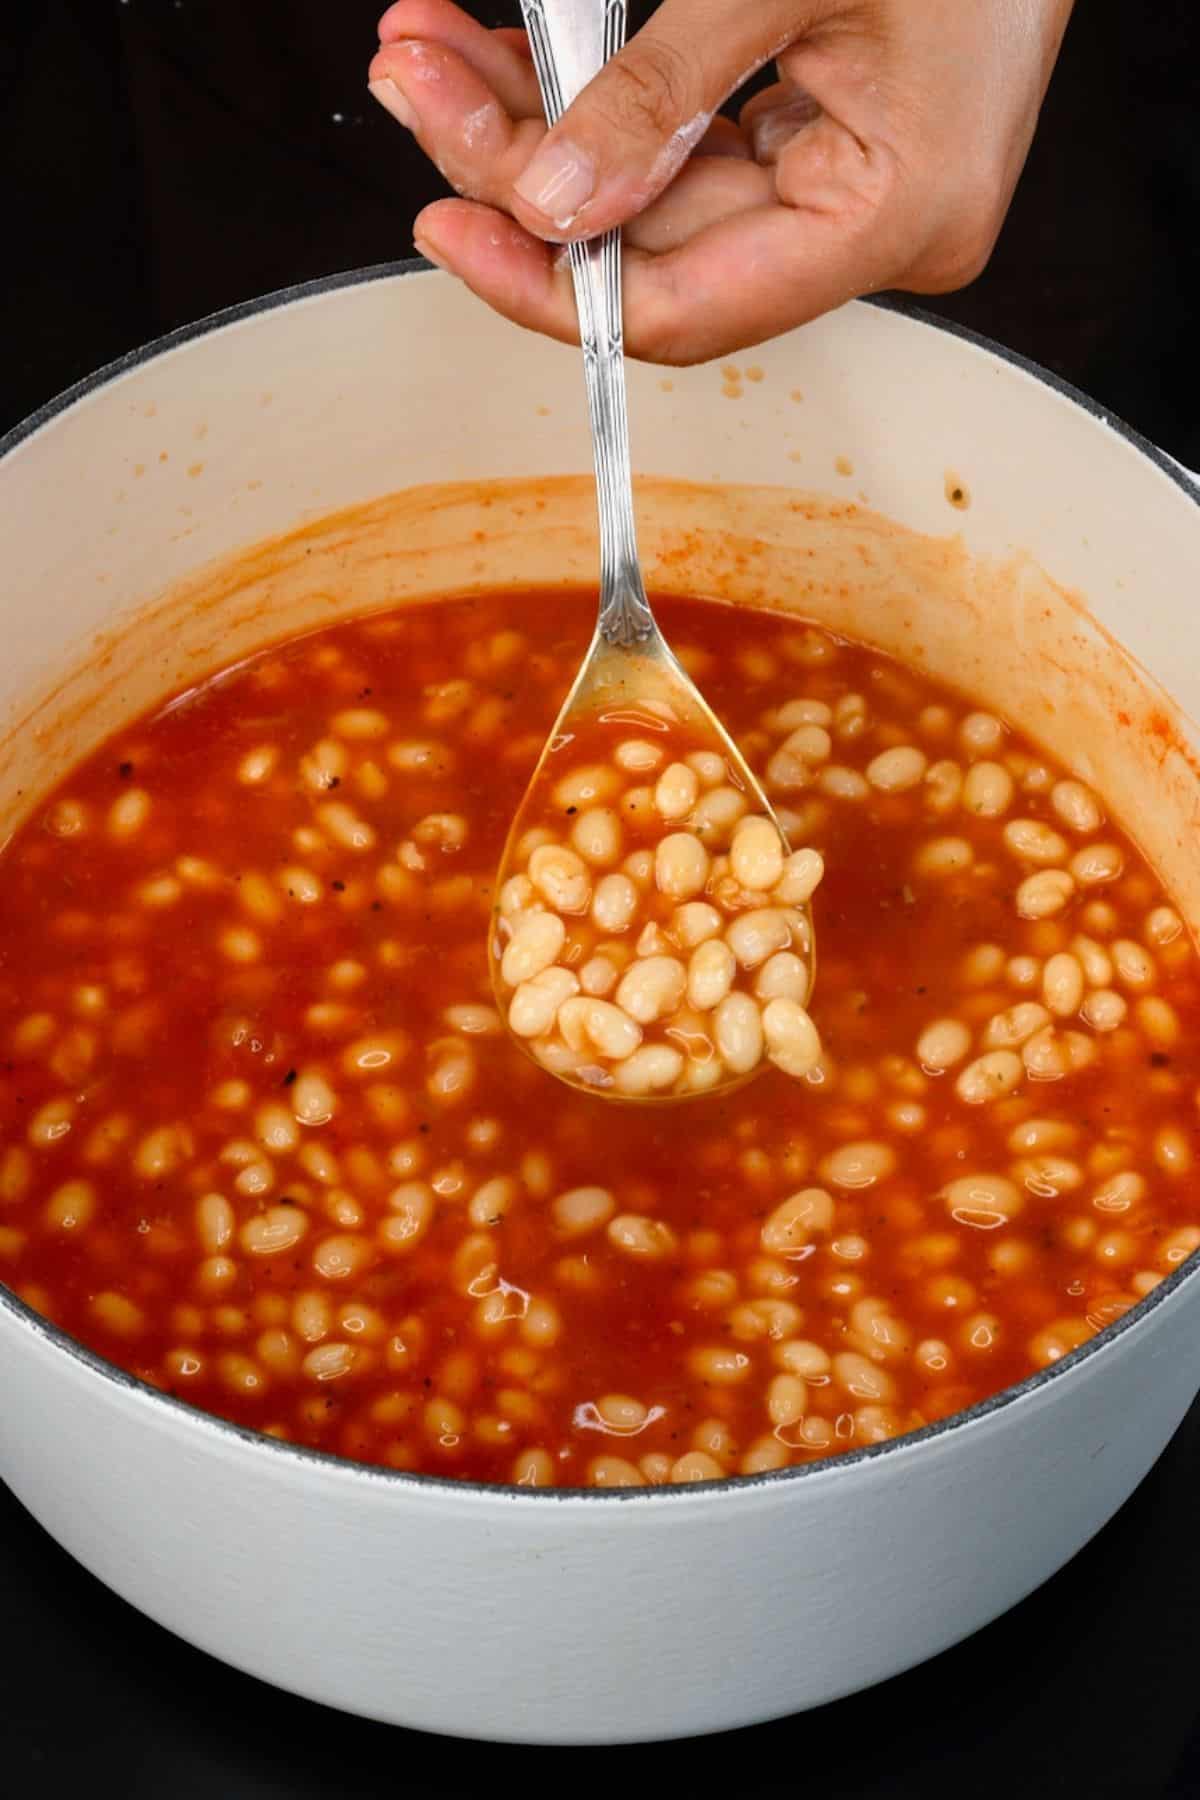 A ladle with homemade baked beans